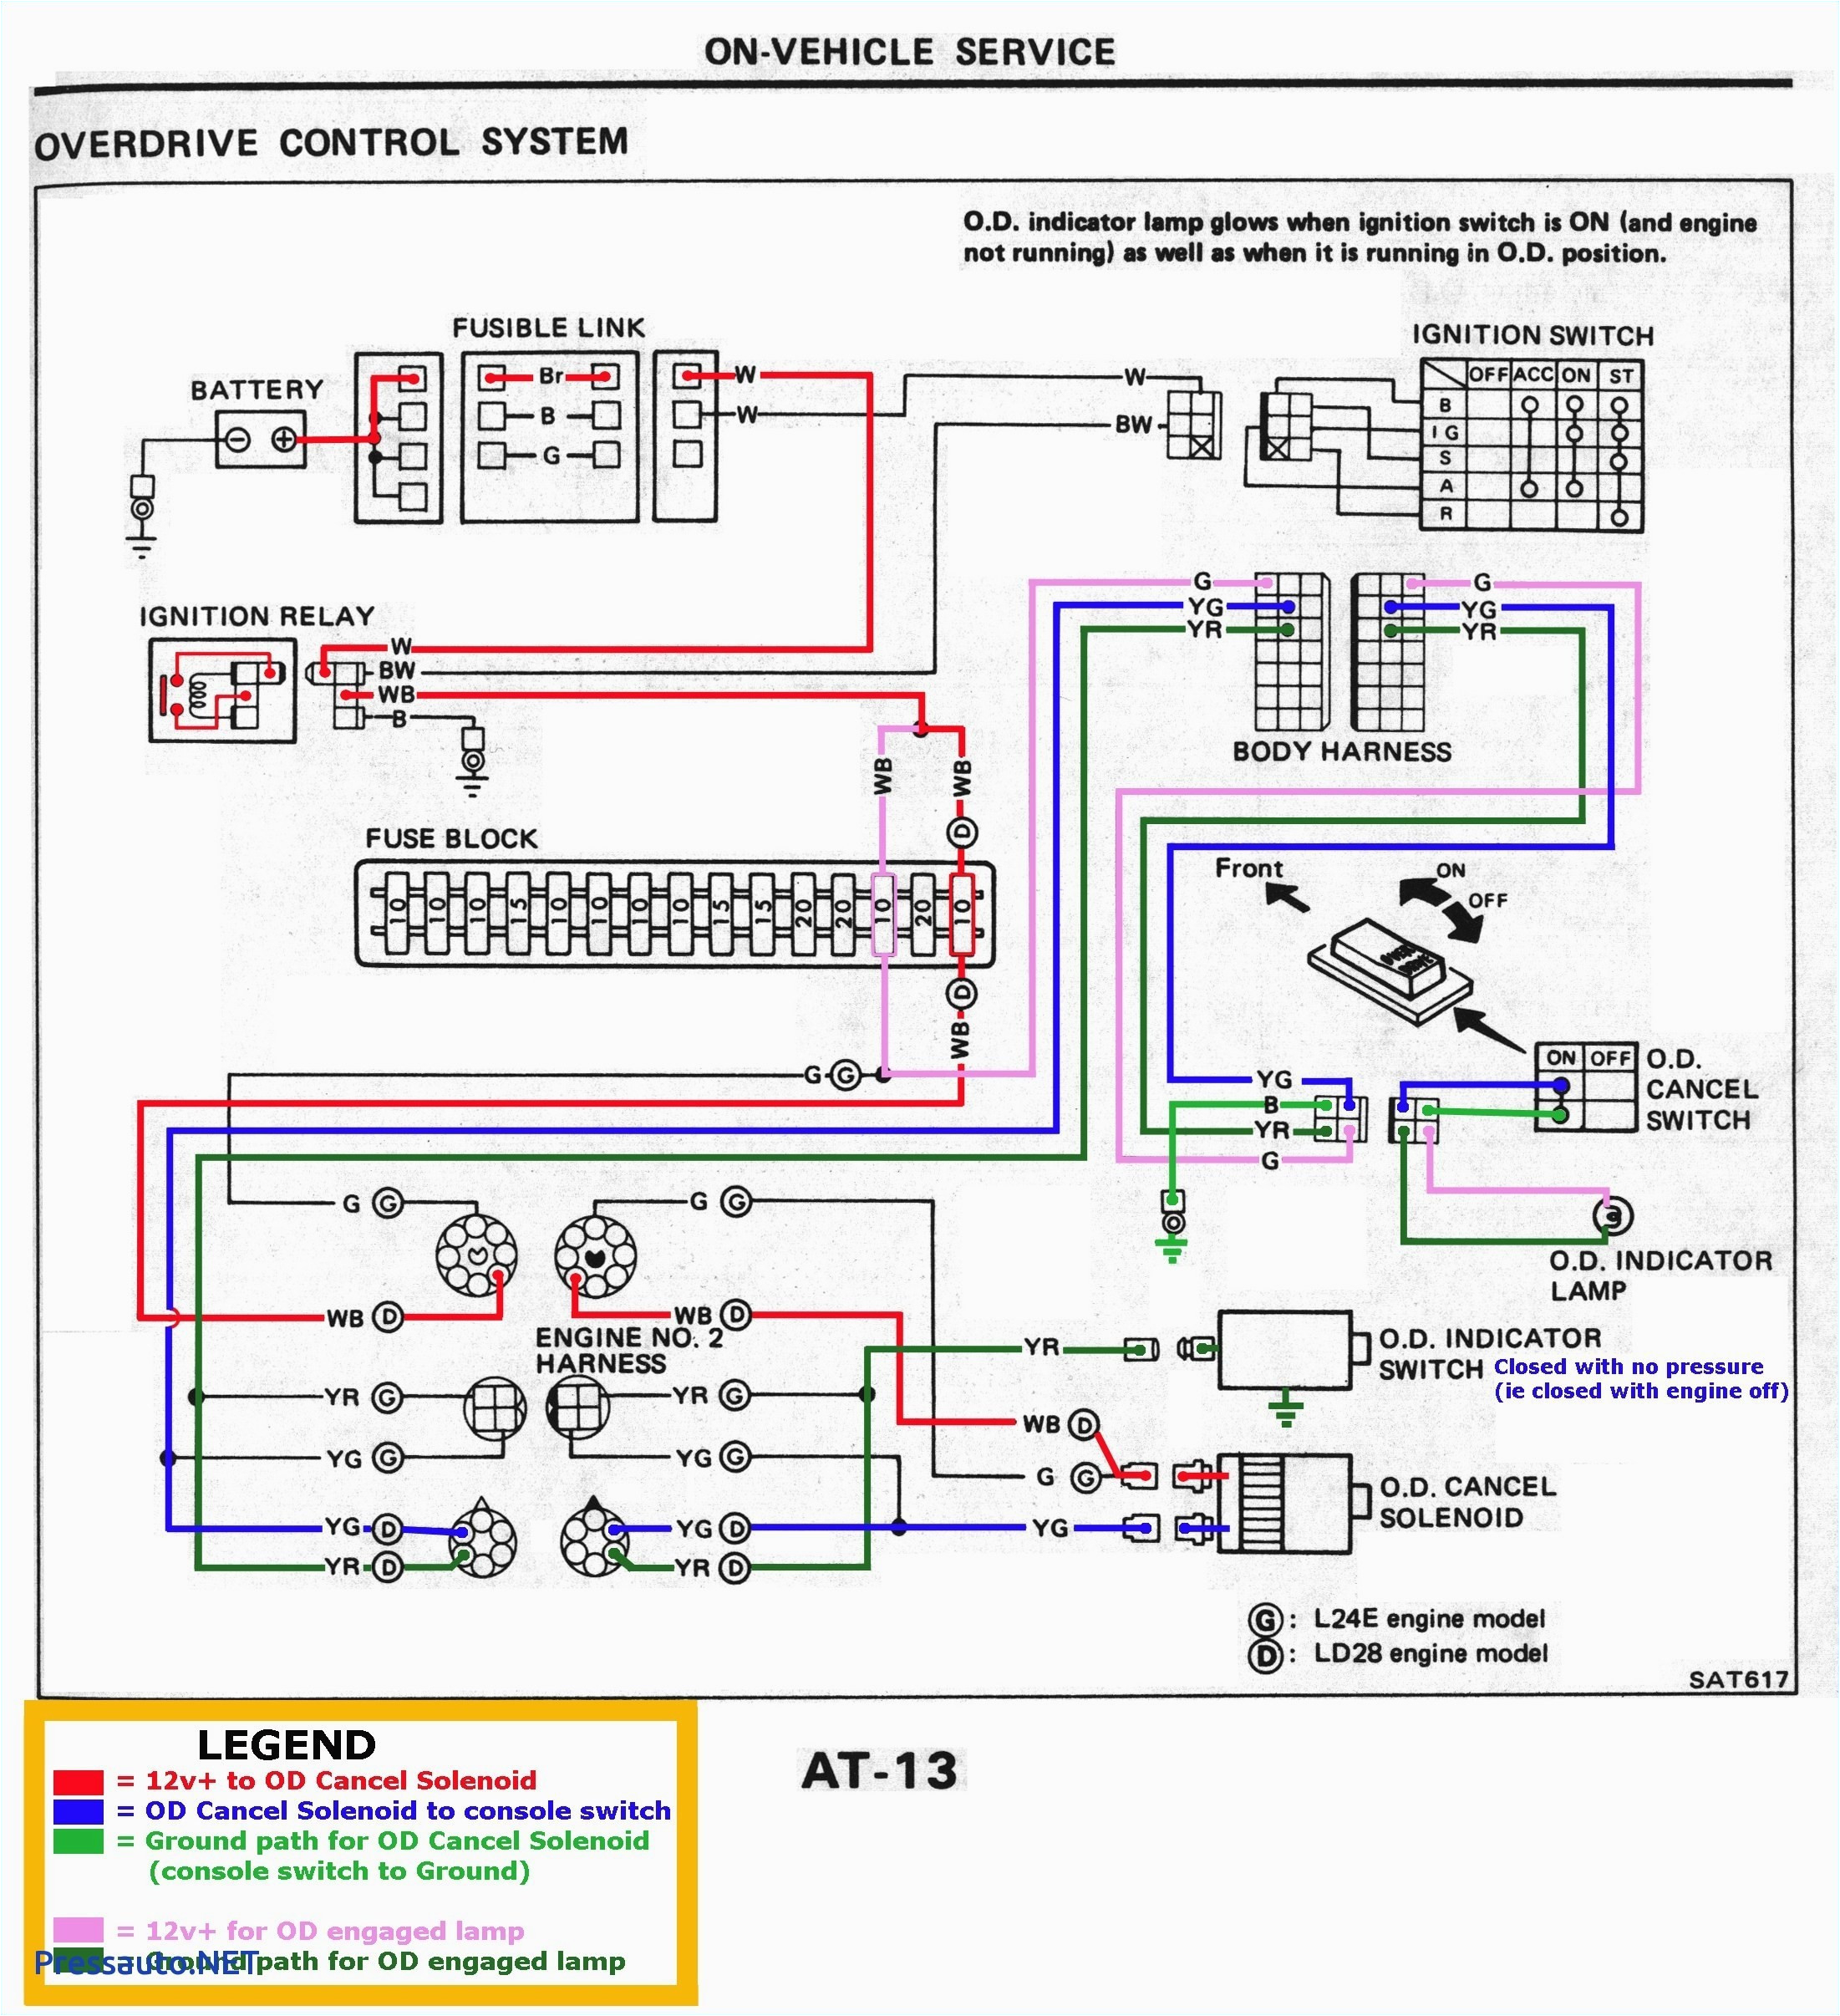 wiring diagram for light and switch free download wiring diagram wiring diagram for 3 way switch with light free download